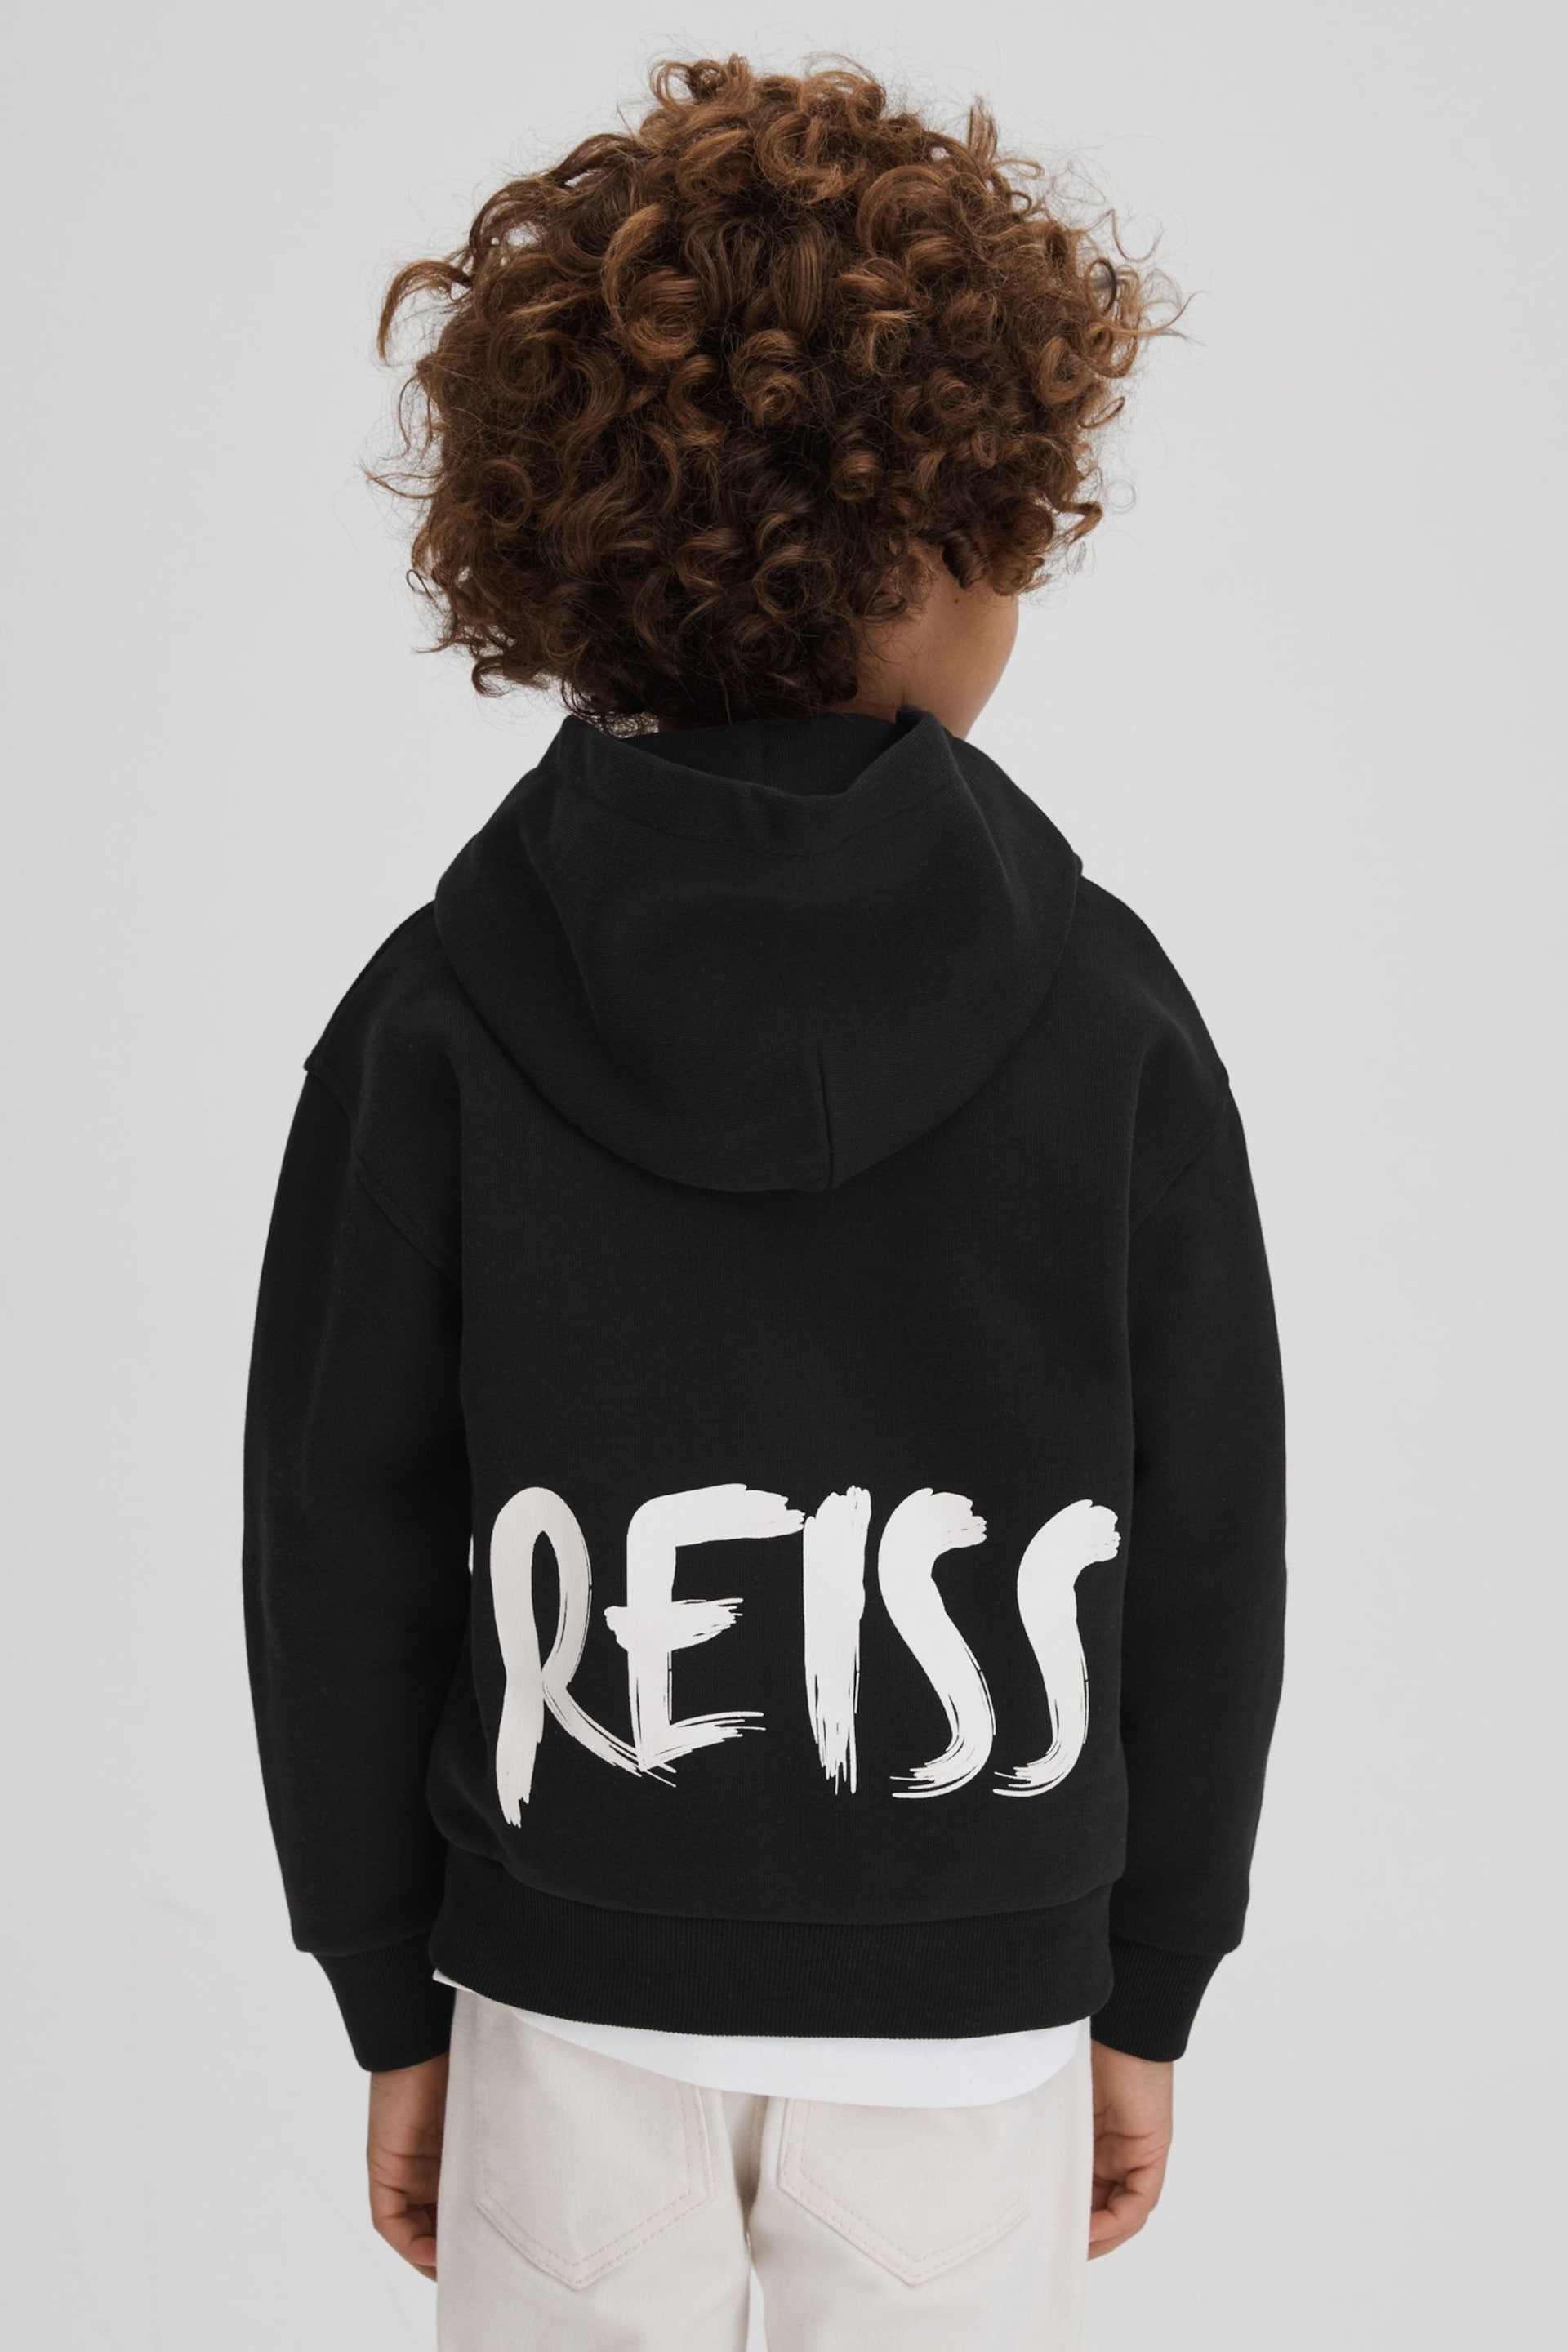 Reiss Washed Black Newton Senior Cotton Relaxed Motif Hoodie - Image 6 of 7